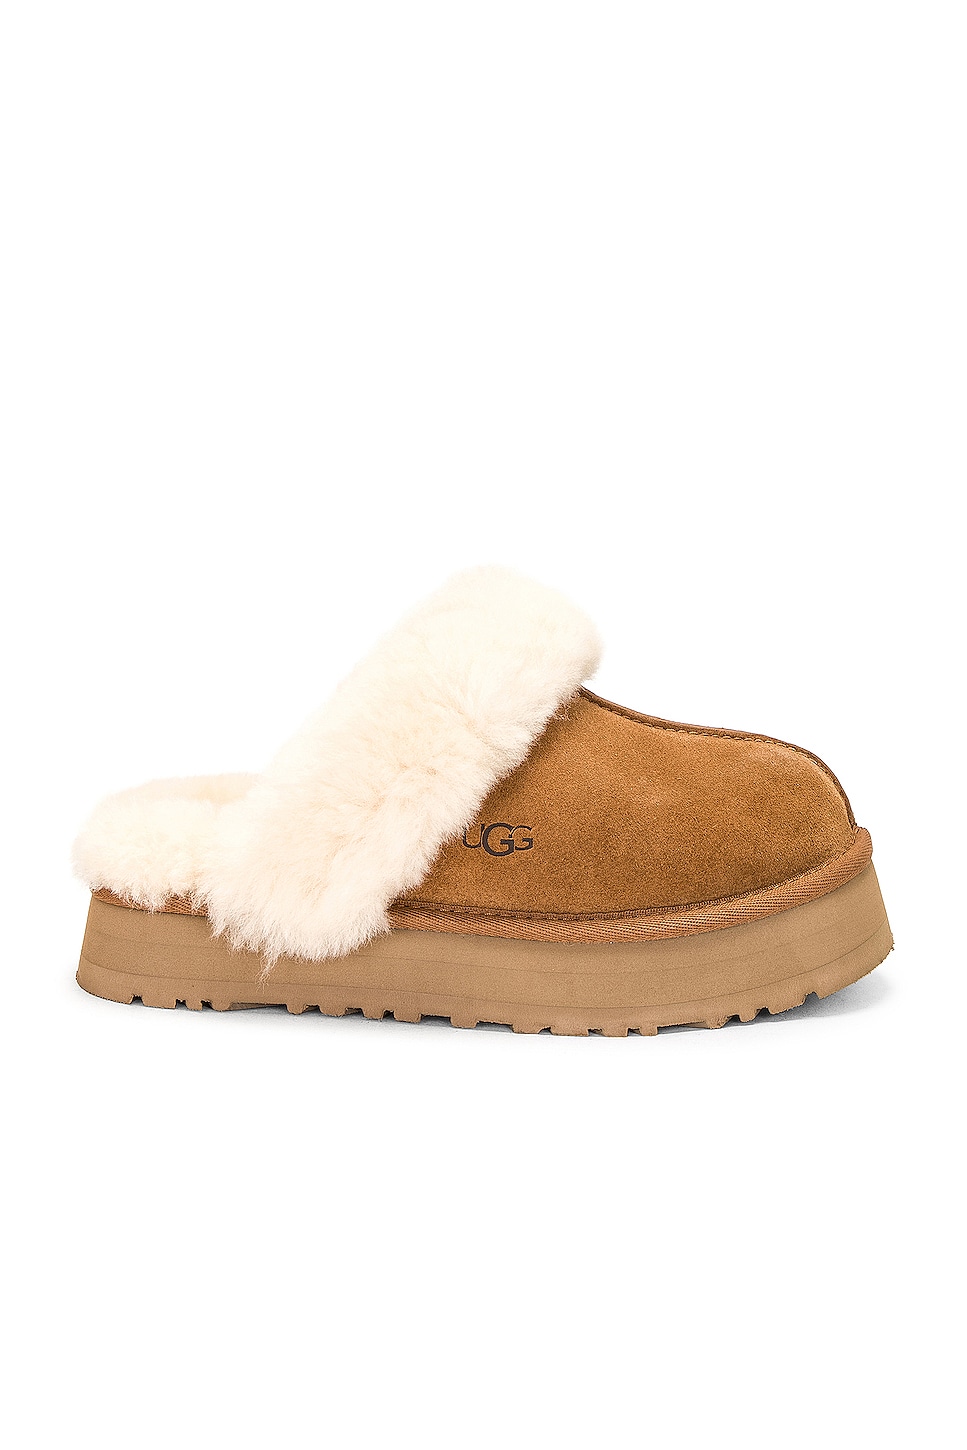 Image 1 of UGG Disquette Slipper in Chestnut